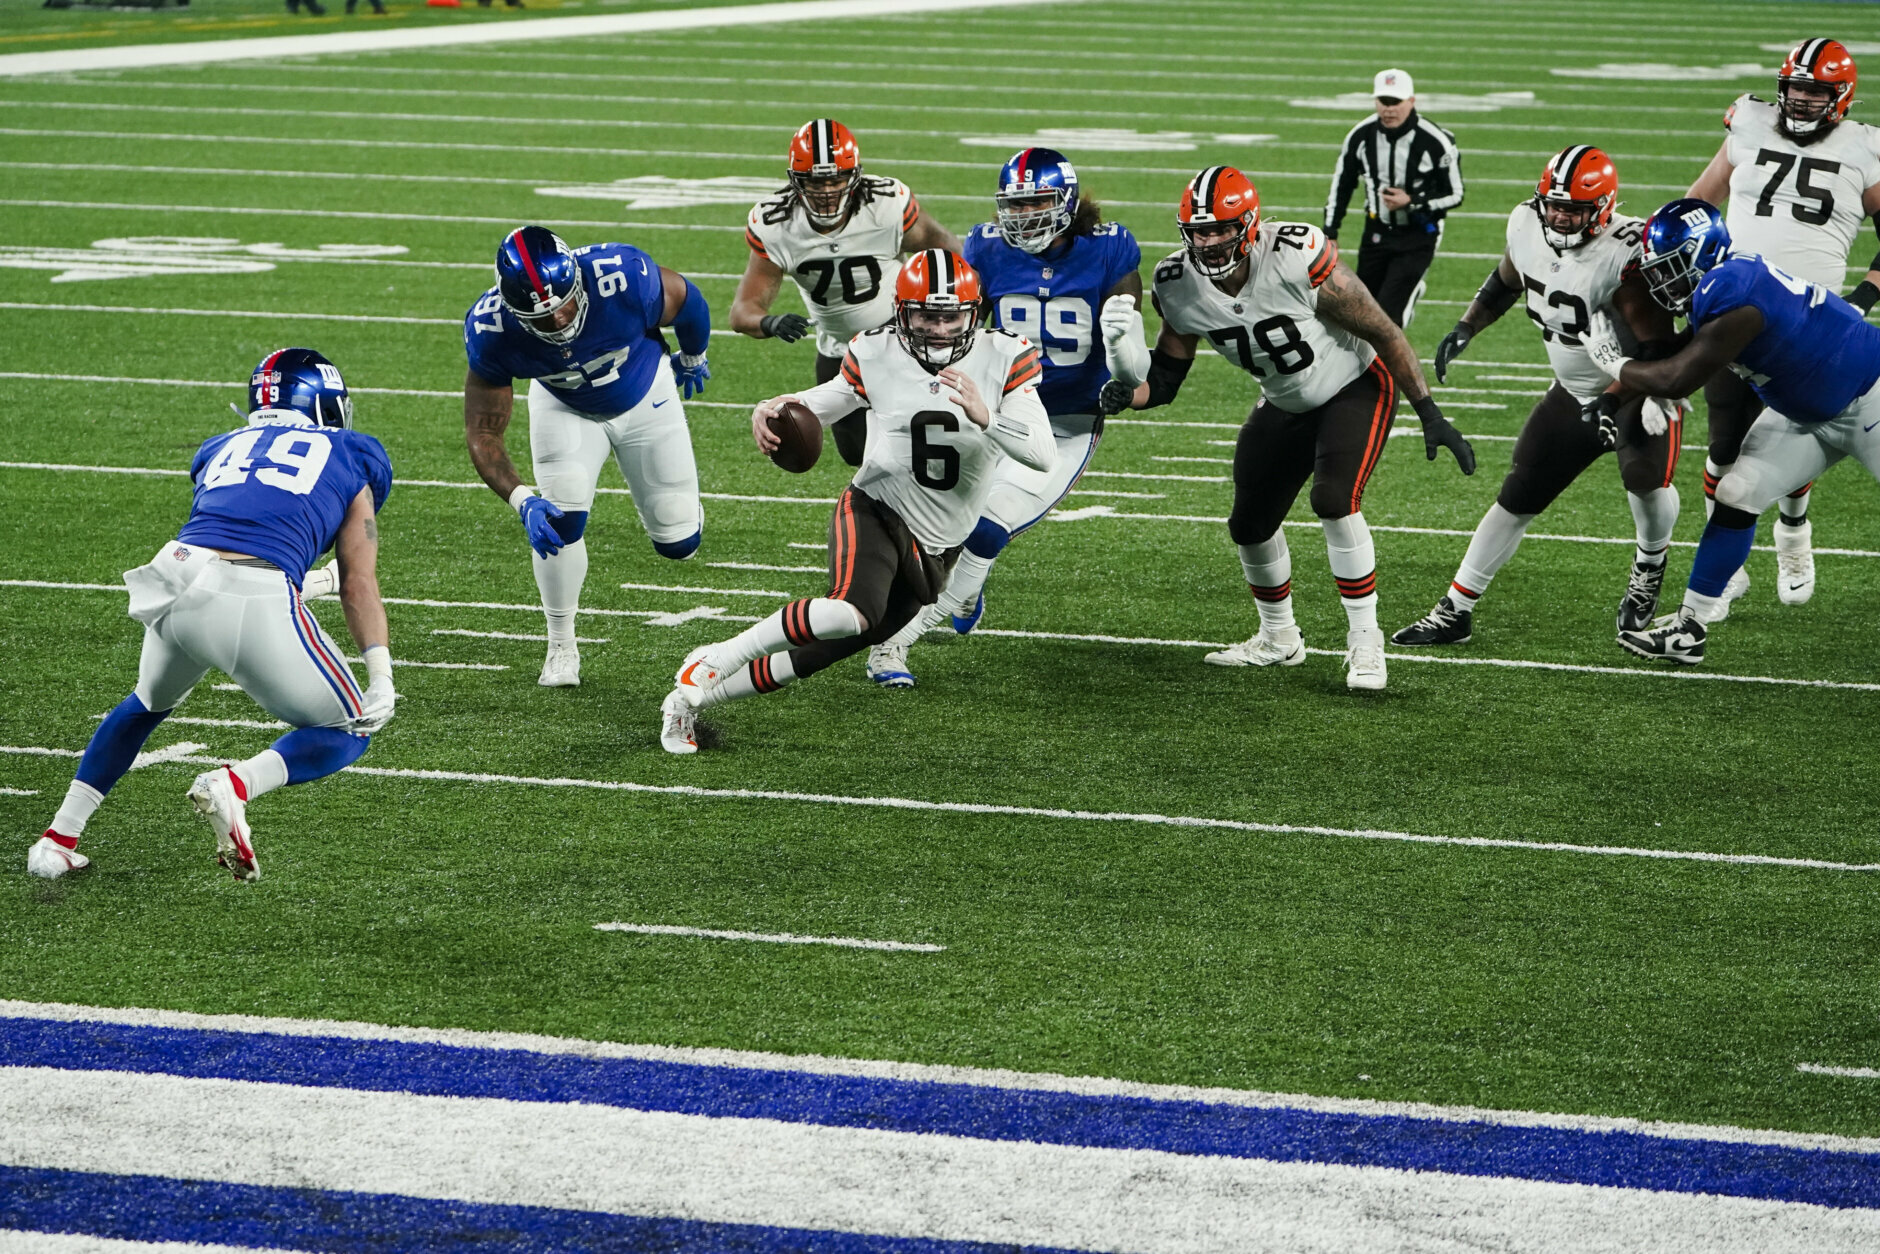 <p><em><strong>Browns 20</strong></em><br />
<em><strong>Giants 6</strong></em></p>
<p>This <a href="https://profootballtalk.nbcsports.com/2020/12/18/freddie-kitchens-on-calling-plays-against-cleveland-its-kind-of-ironic-but-its-the-next-game/" target="_blank" rel="noopener">ironic game</a> comes more than a week after Alanis Morissette released a new album.</p>
<p><a href="https://twitter.com/RobWoodfork/status/1339574235501645825?s=20" target="_blank" rel="noopener">Freddie Kitchens called plays against the team that fired him</a>, leaving the Giants offense every bit as inept as you&#8217;d think a unit with Kitchens calling plays for Colt McCoy would be. Baker Mayfield <a href="https://profootballtalk.nbcsports.com/2020/12/18/baker-mayfield-browns-will-try-to-beat-giants-for-odell-beckham/" target="_blank" rel="noopener">won one for Odell Beckham</a> and his swag is rightfully off the charts after strong showings in back-to-back prime-time games for Cleveland&#8217;s first 10-win team in 13 years.</p>
